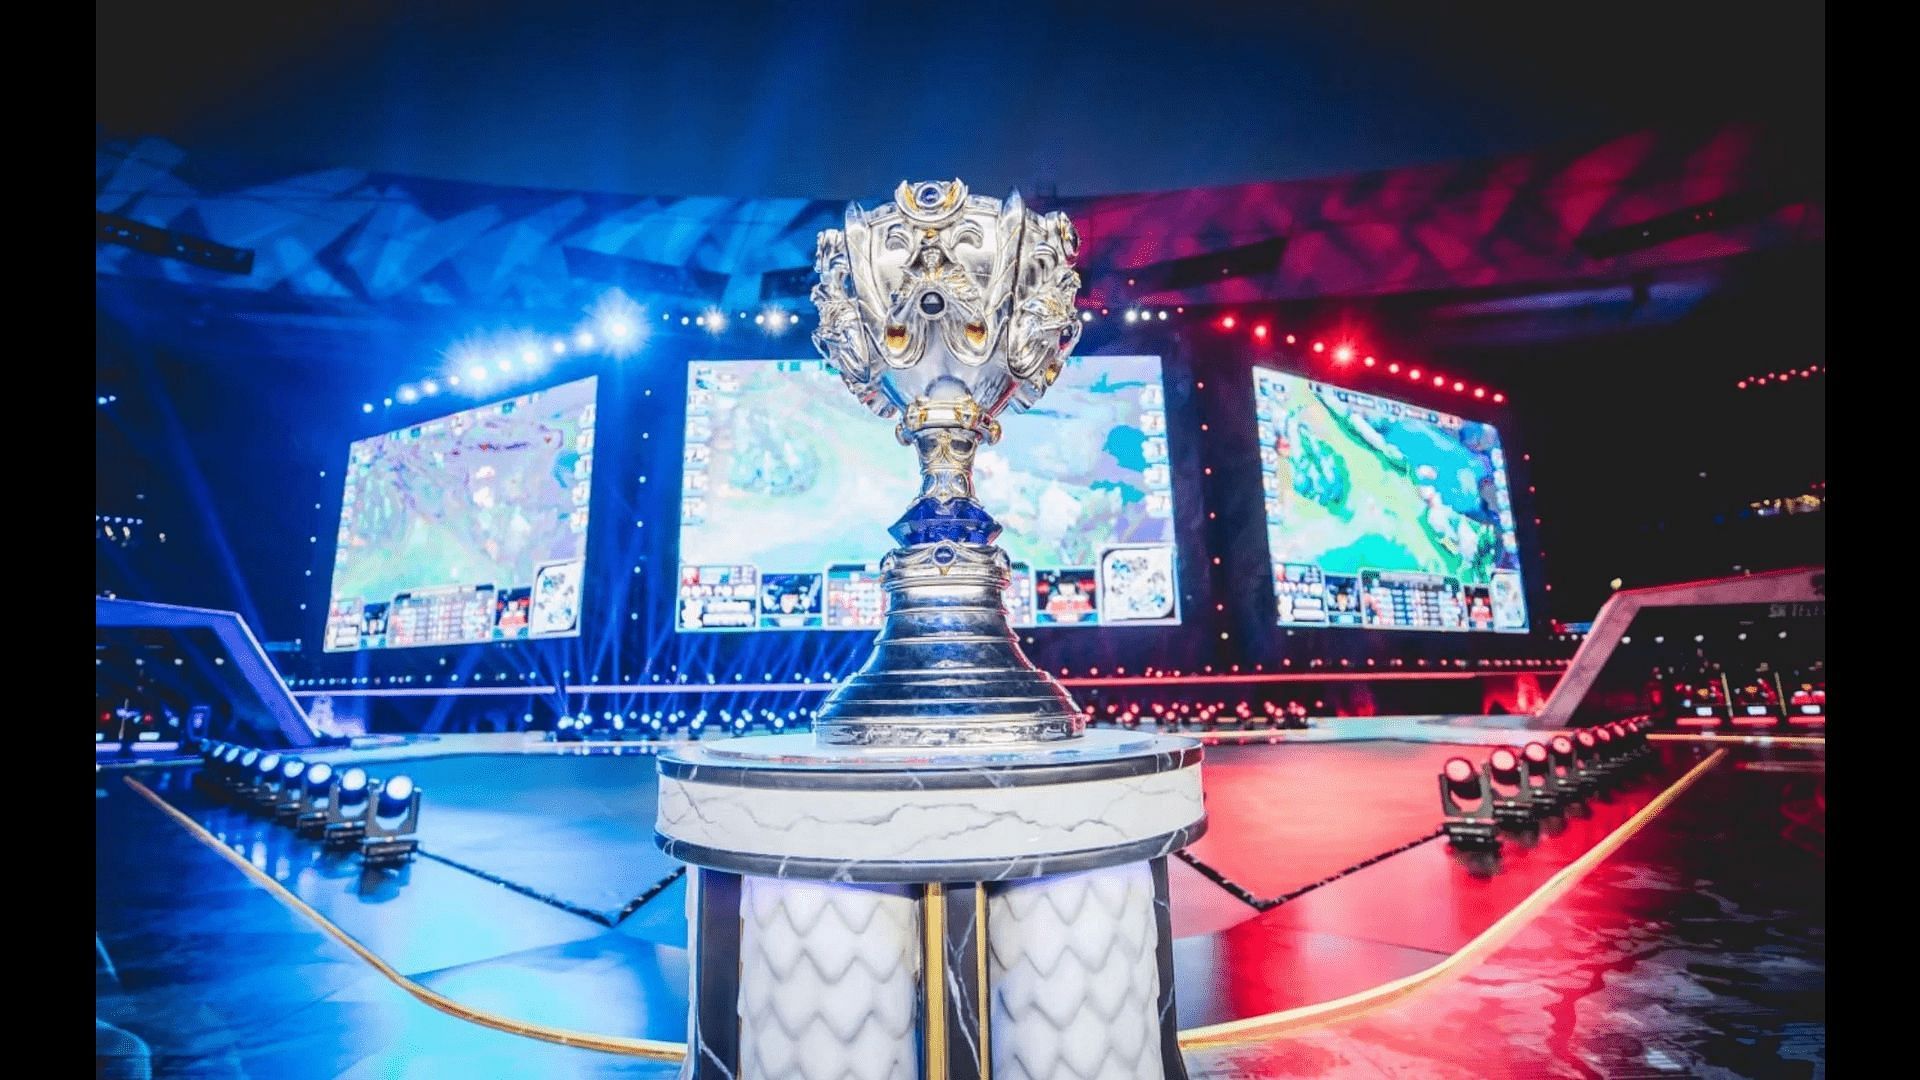 League of Legends Worlds 2022 will be a thrilling tournament (Image via Riot Games)